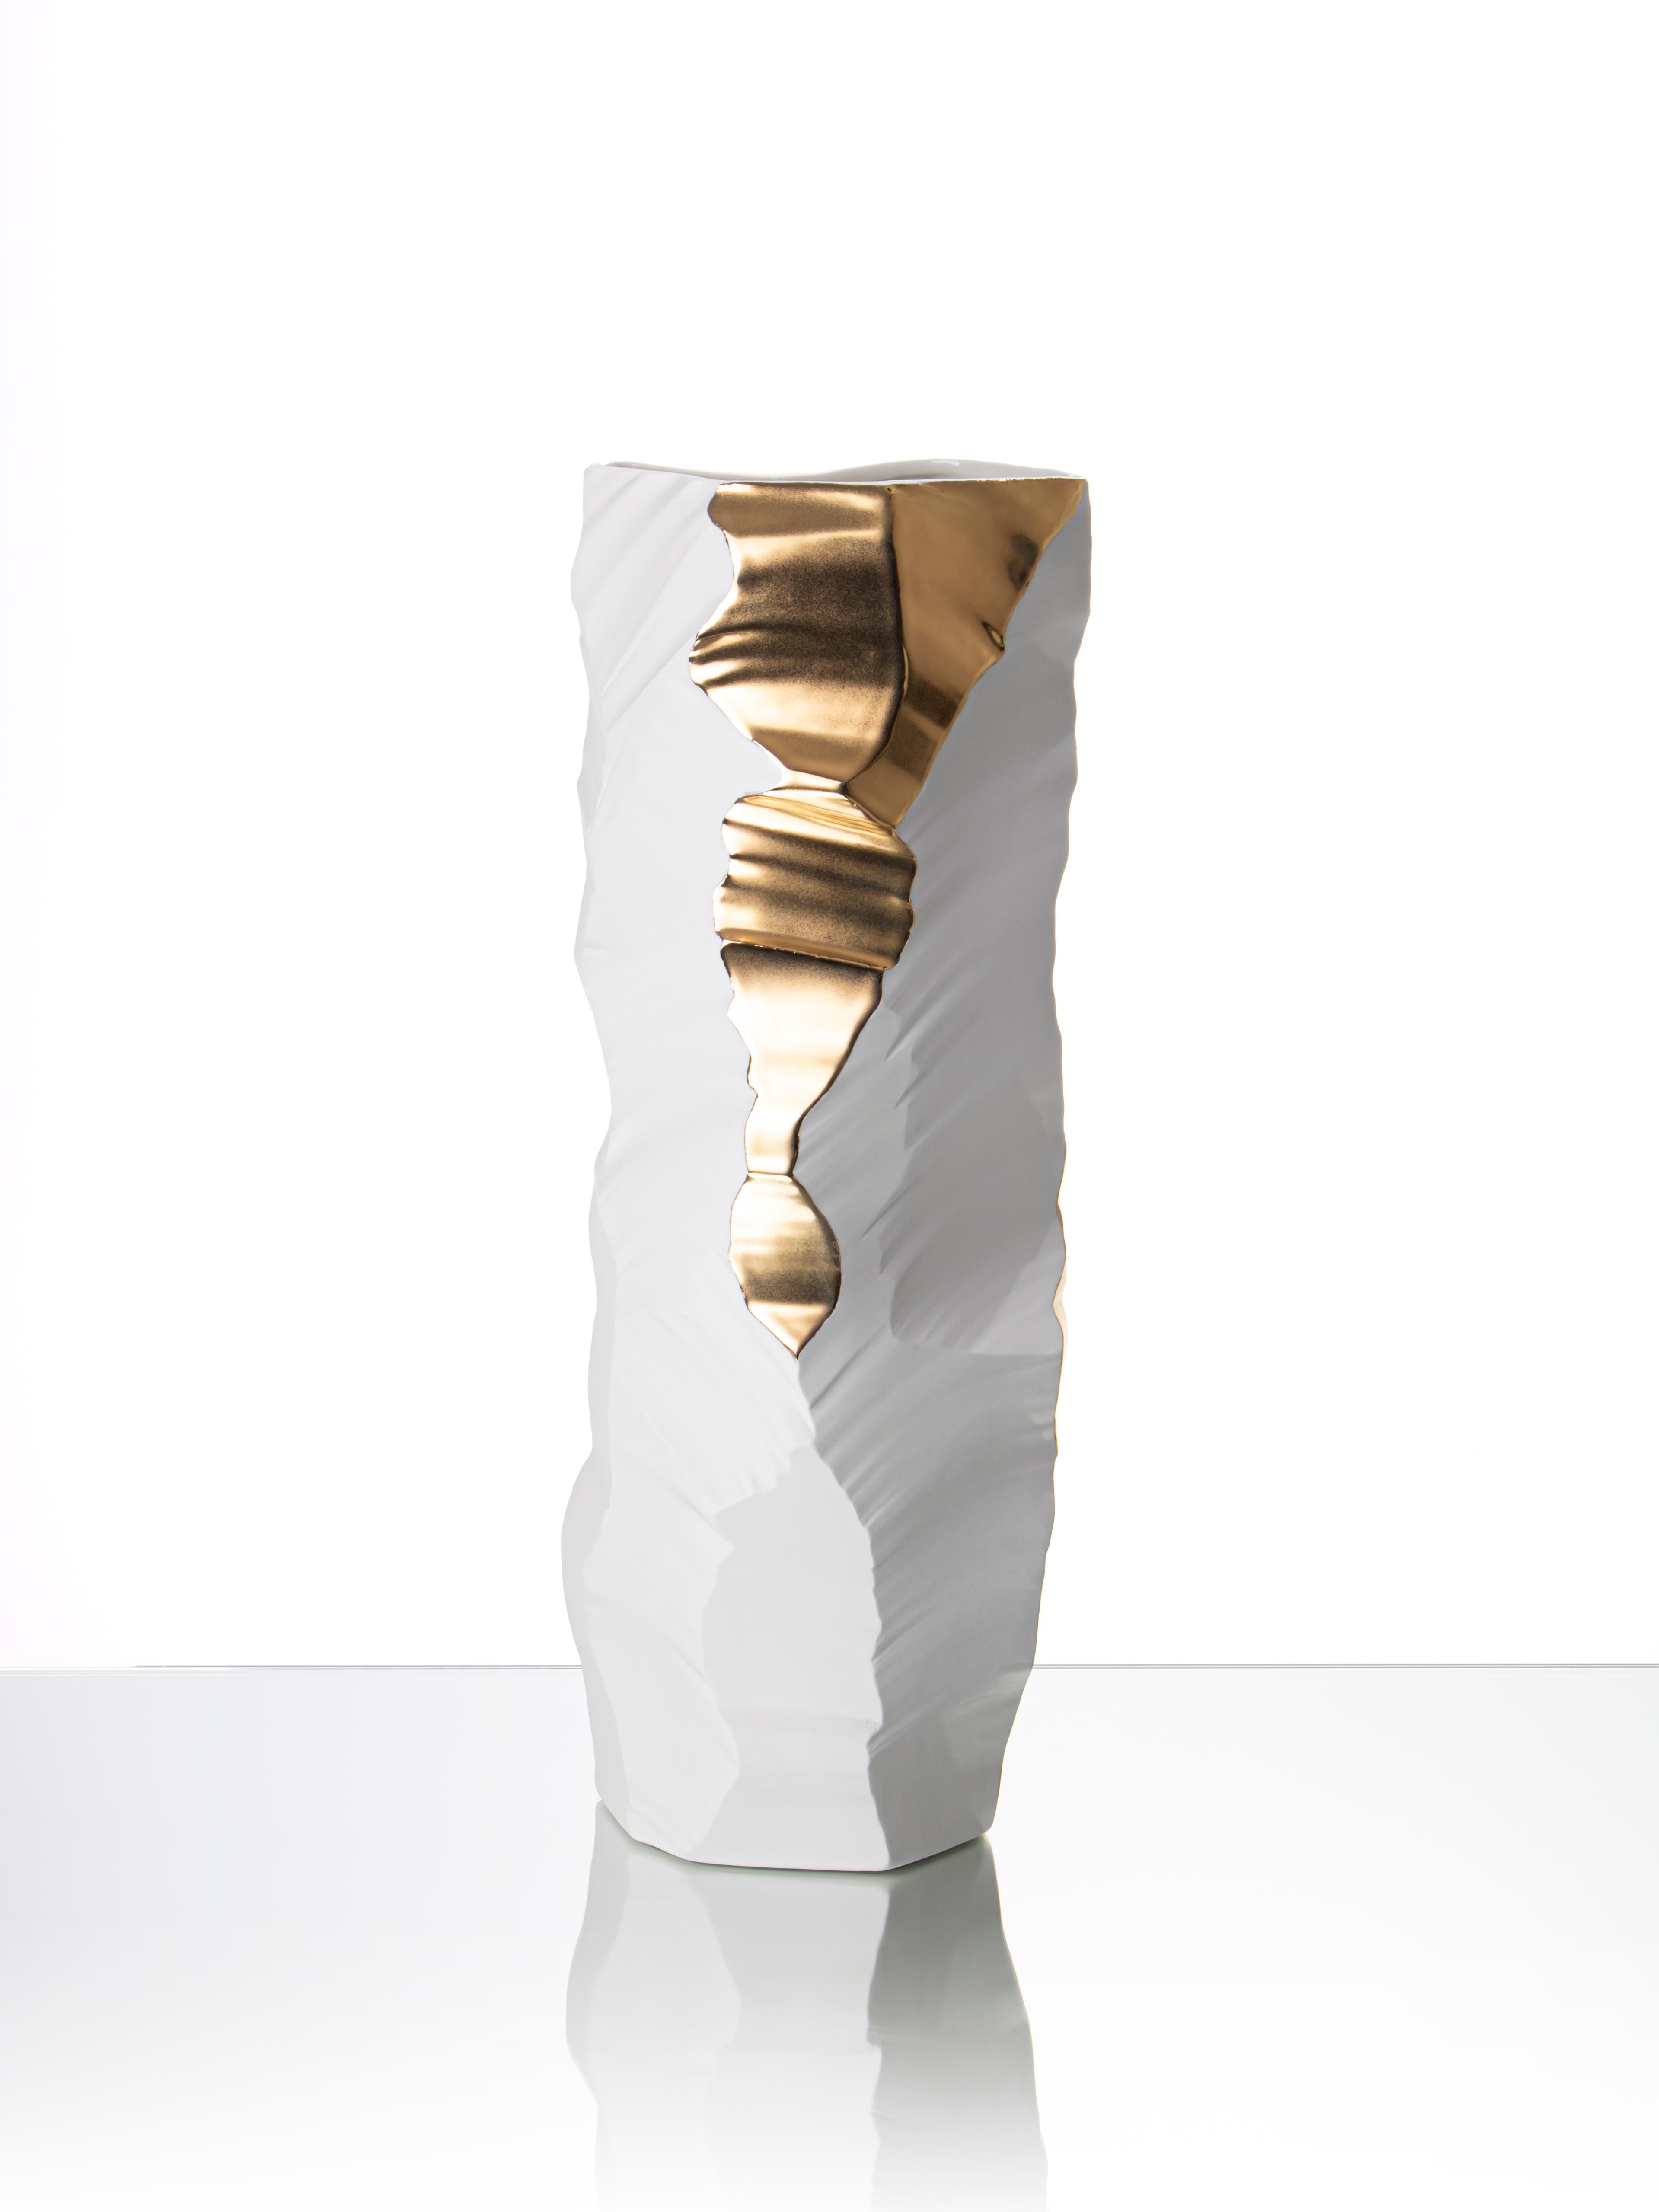 Porcelain vase / sculpture with a bold personality, part of ARTIKA collection, designed by the architect and designer Giovanni Luca Ferreri. Pure white, the signature style of FOS, changes shade every time light hits the glacier-like facets. The